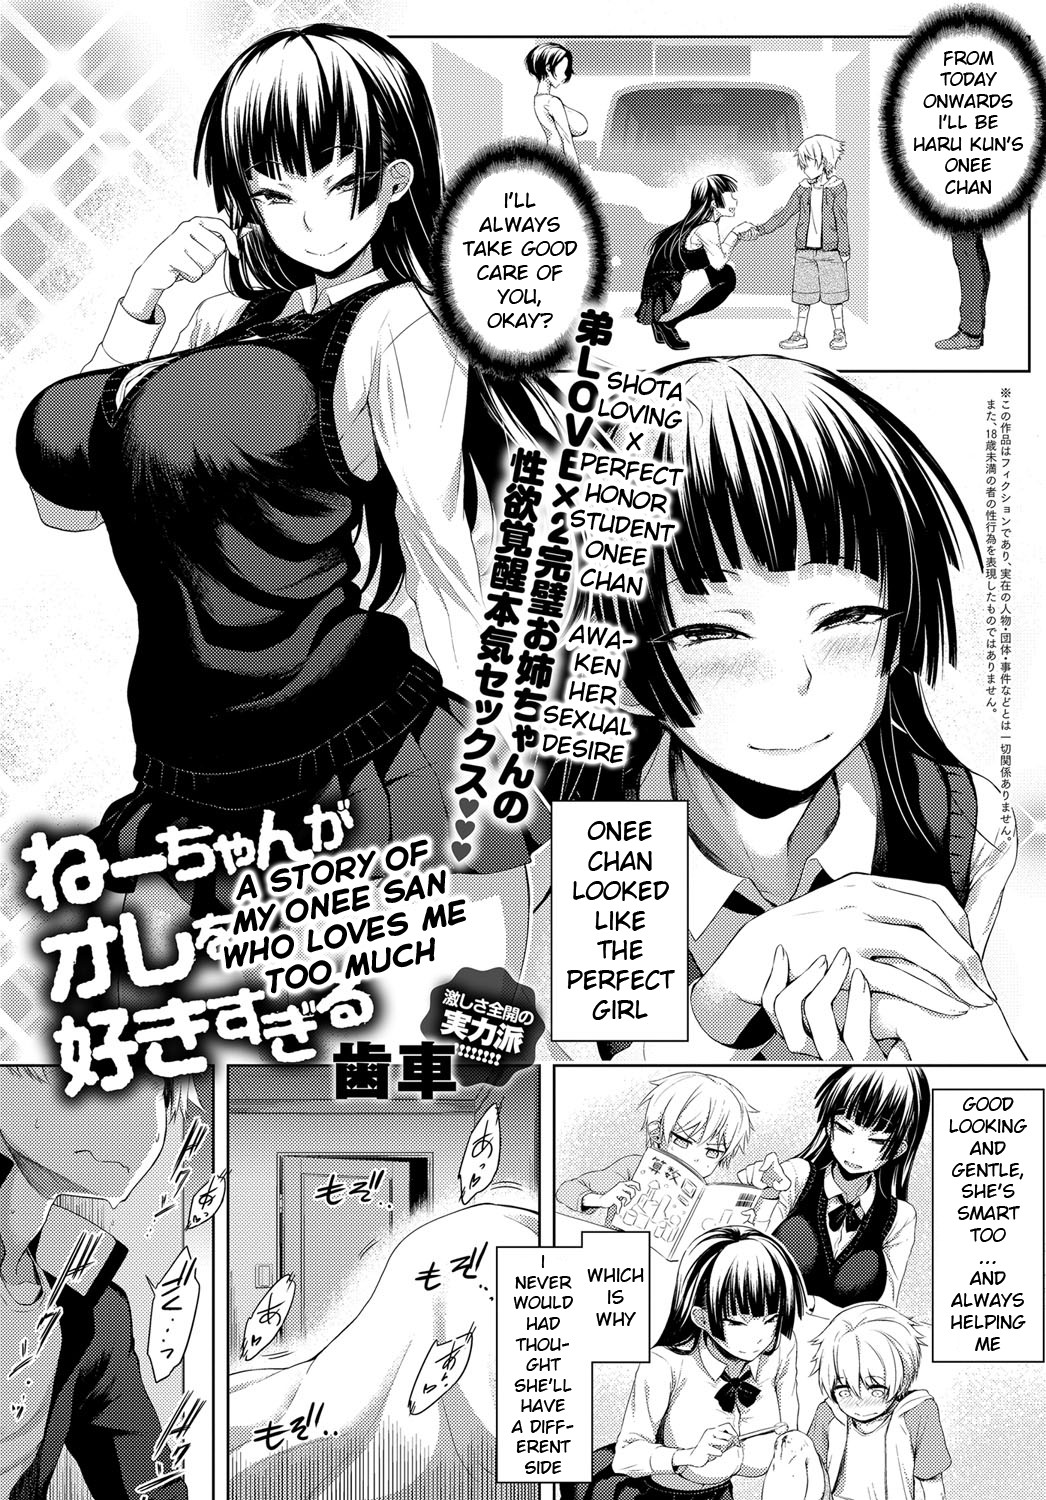 Hentai Manga Comic-A Story of My Onee San Who Loves Me Too Much-Read-1